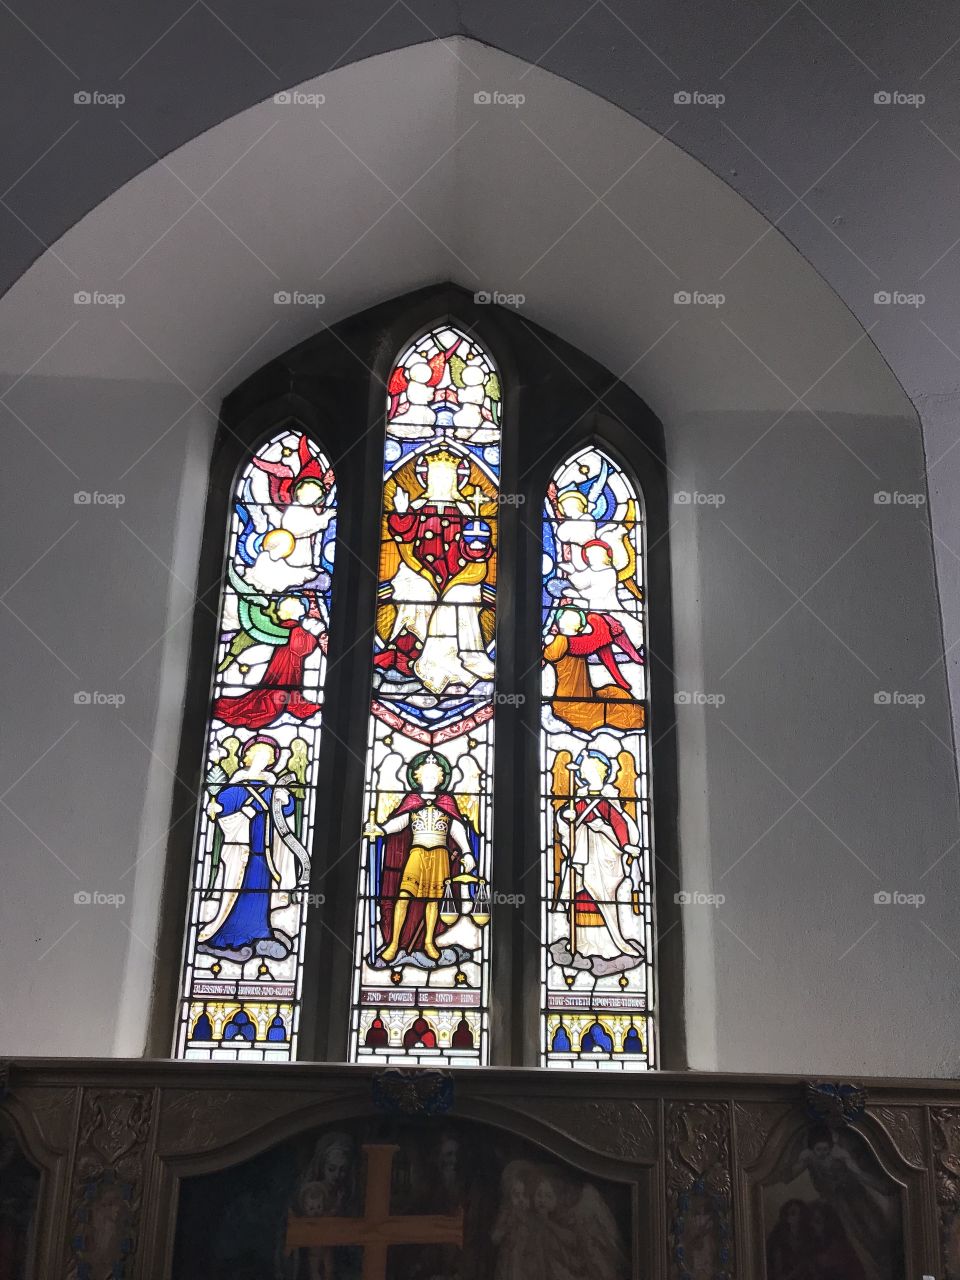 One of a number of first class “stained glass windows” to be found at lovely Lustleigh’s ParisH Church.